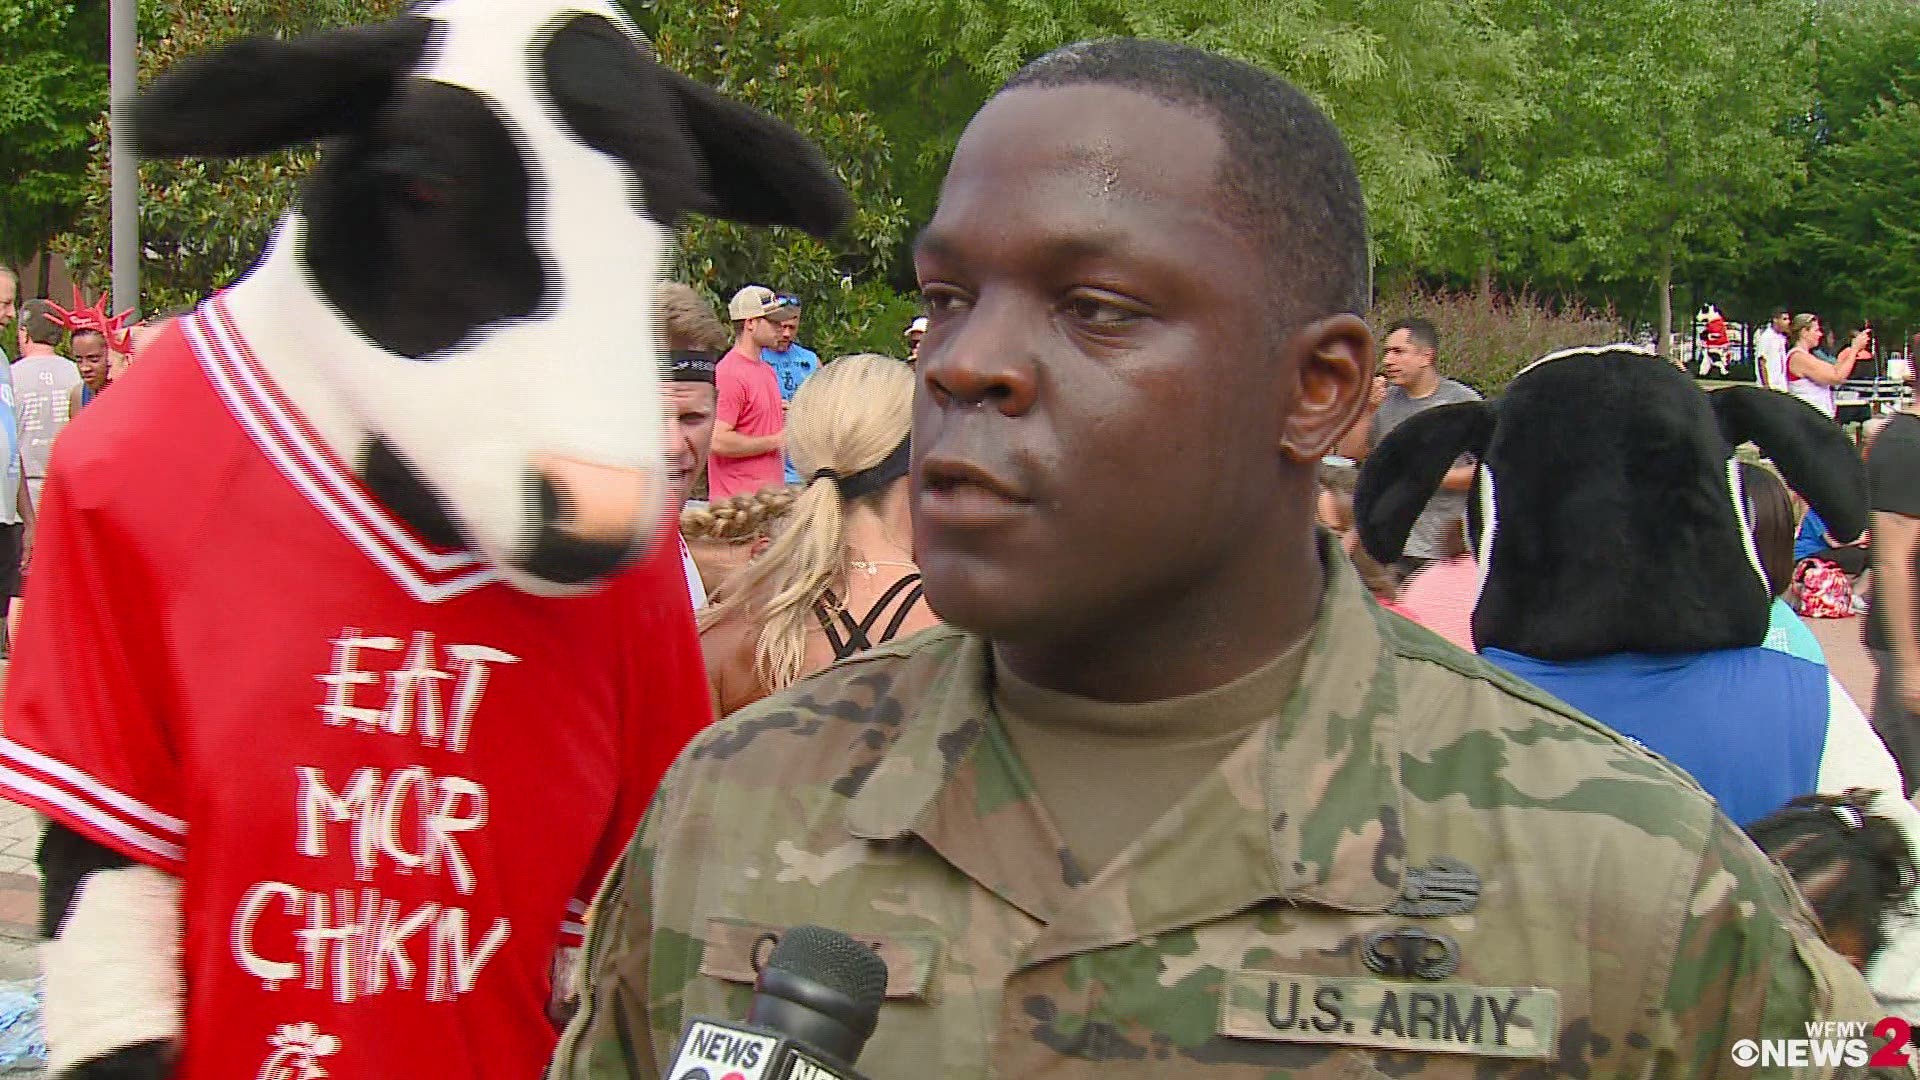 Marcus Clark with the Army National Guard ran in the Freedom Run in honor of his friends who died.